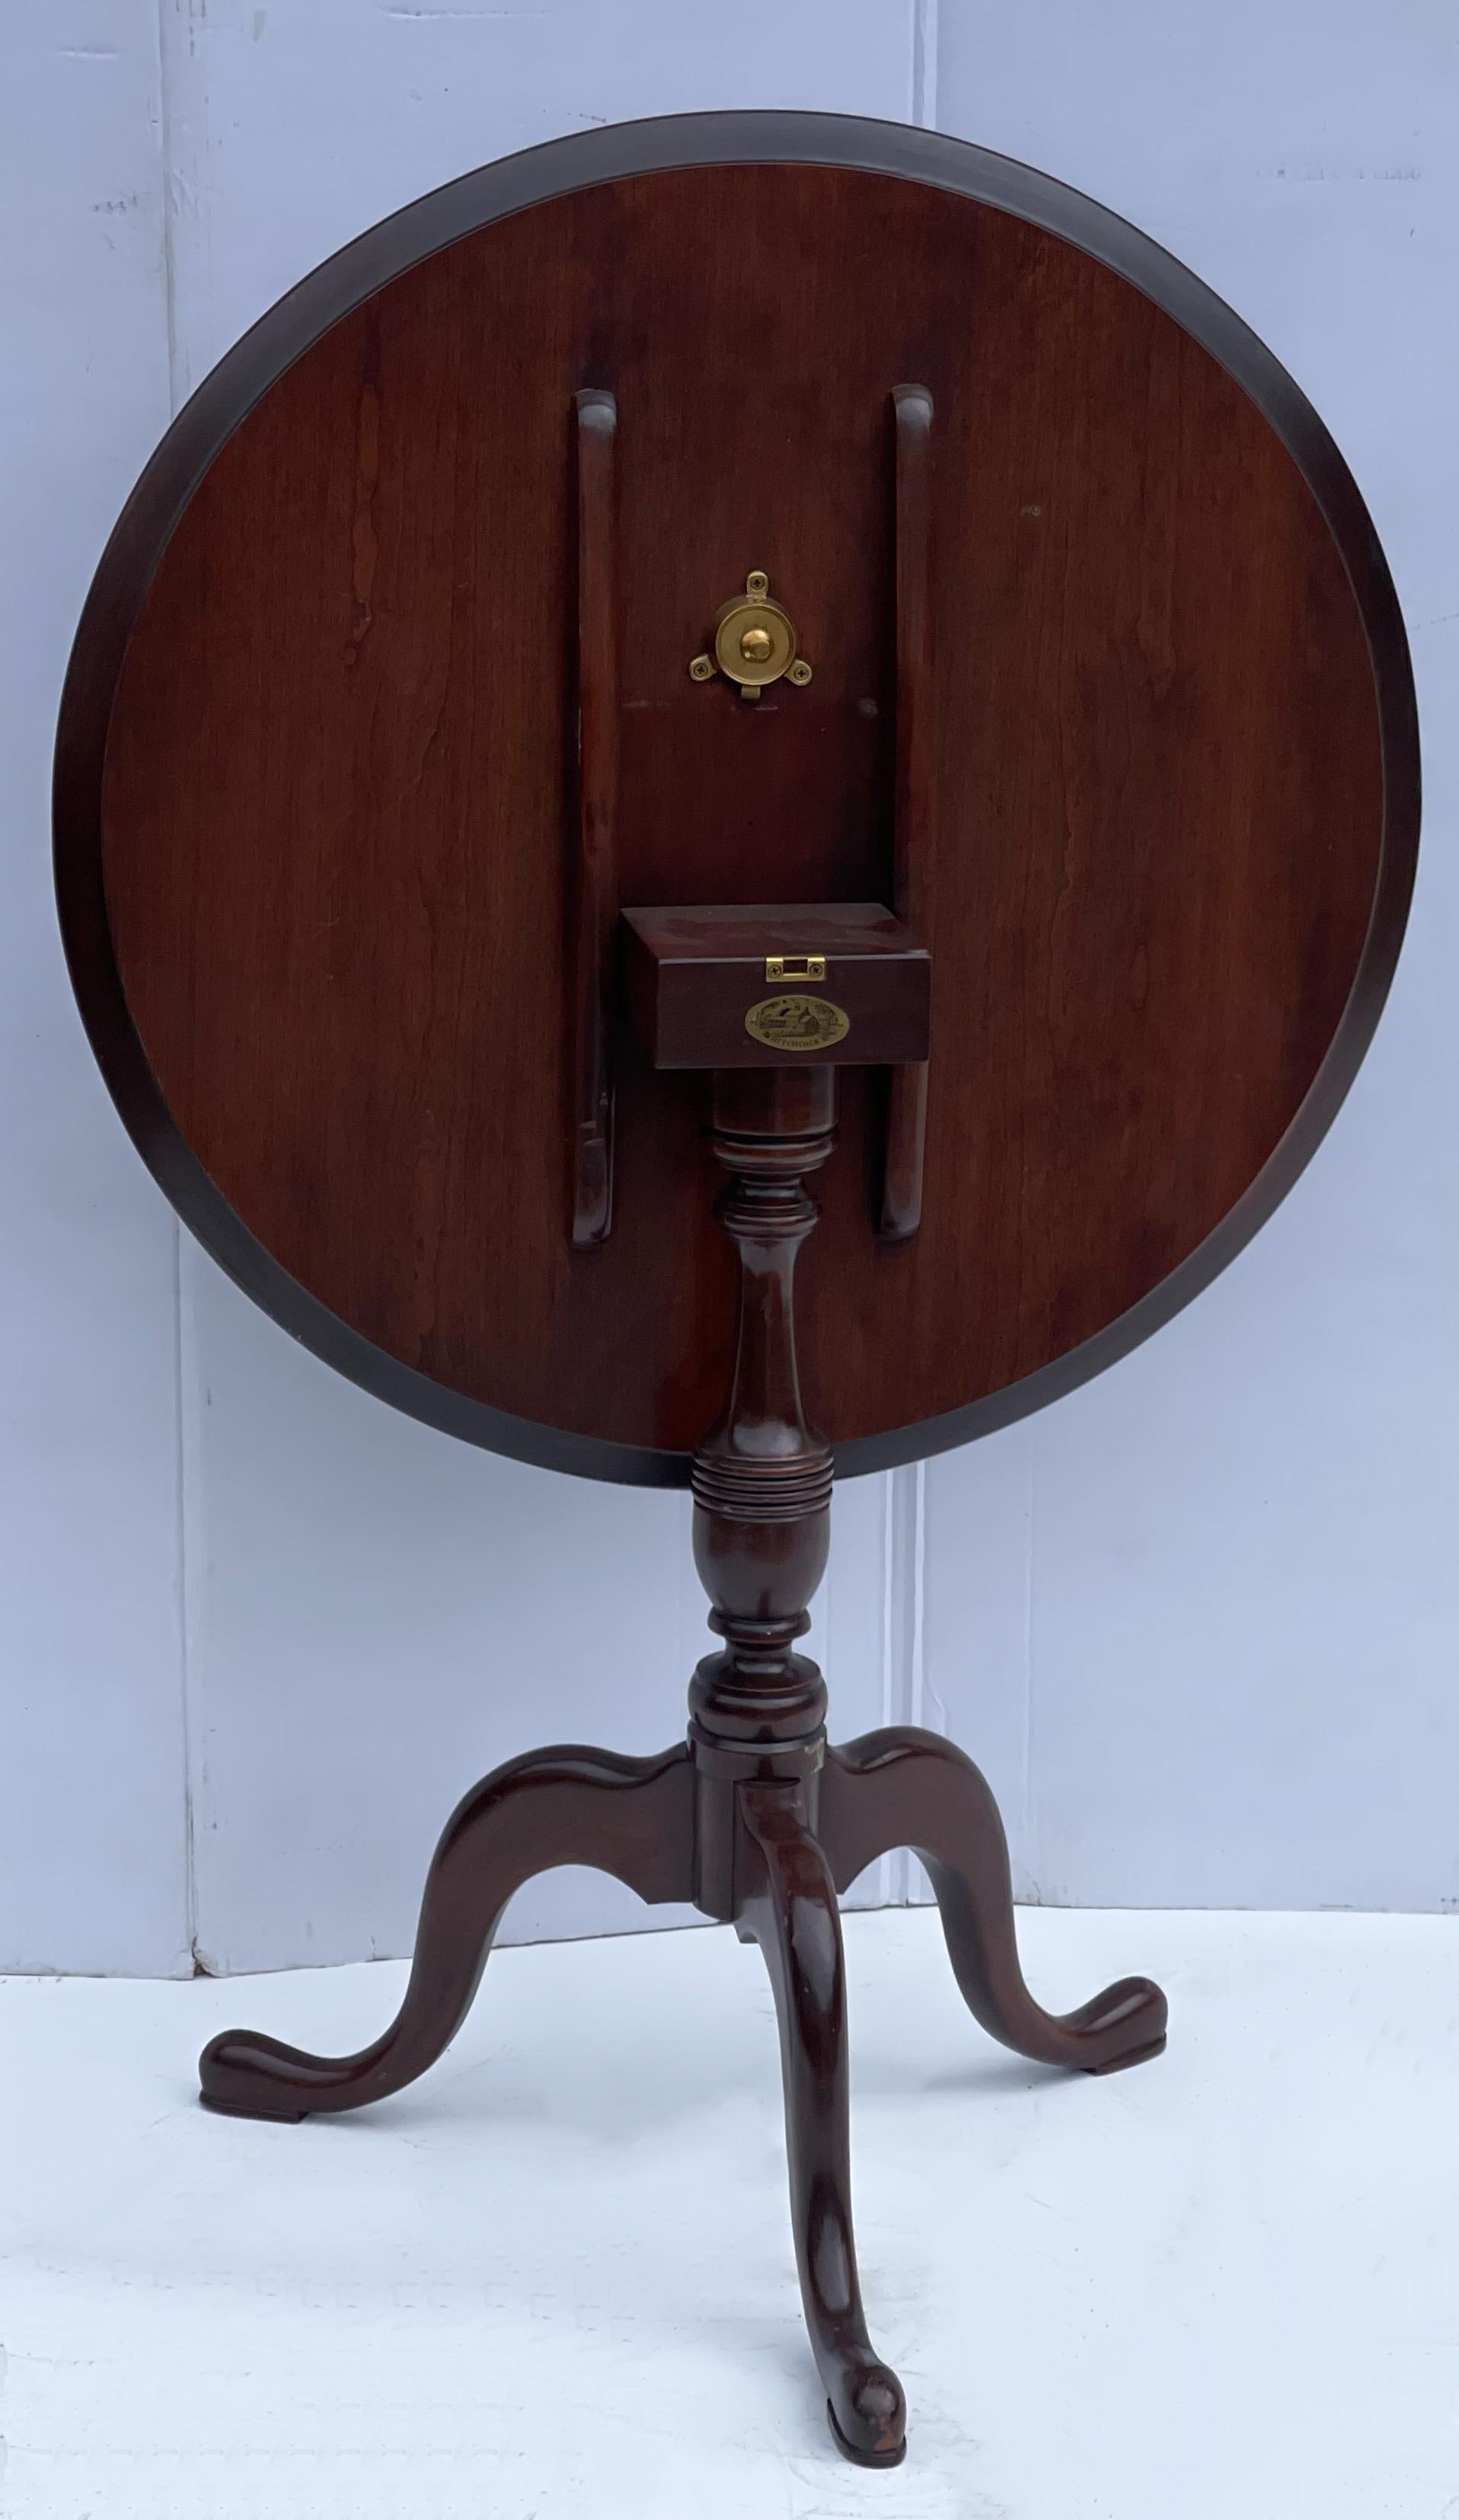 20th Century Mahogany Tripod Tilt Top Side Tables by Baker Furniture for Hitchcock Pair